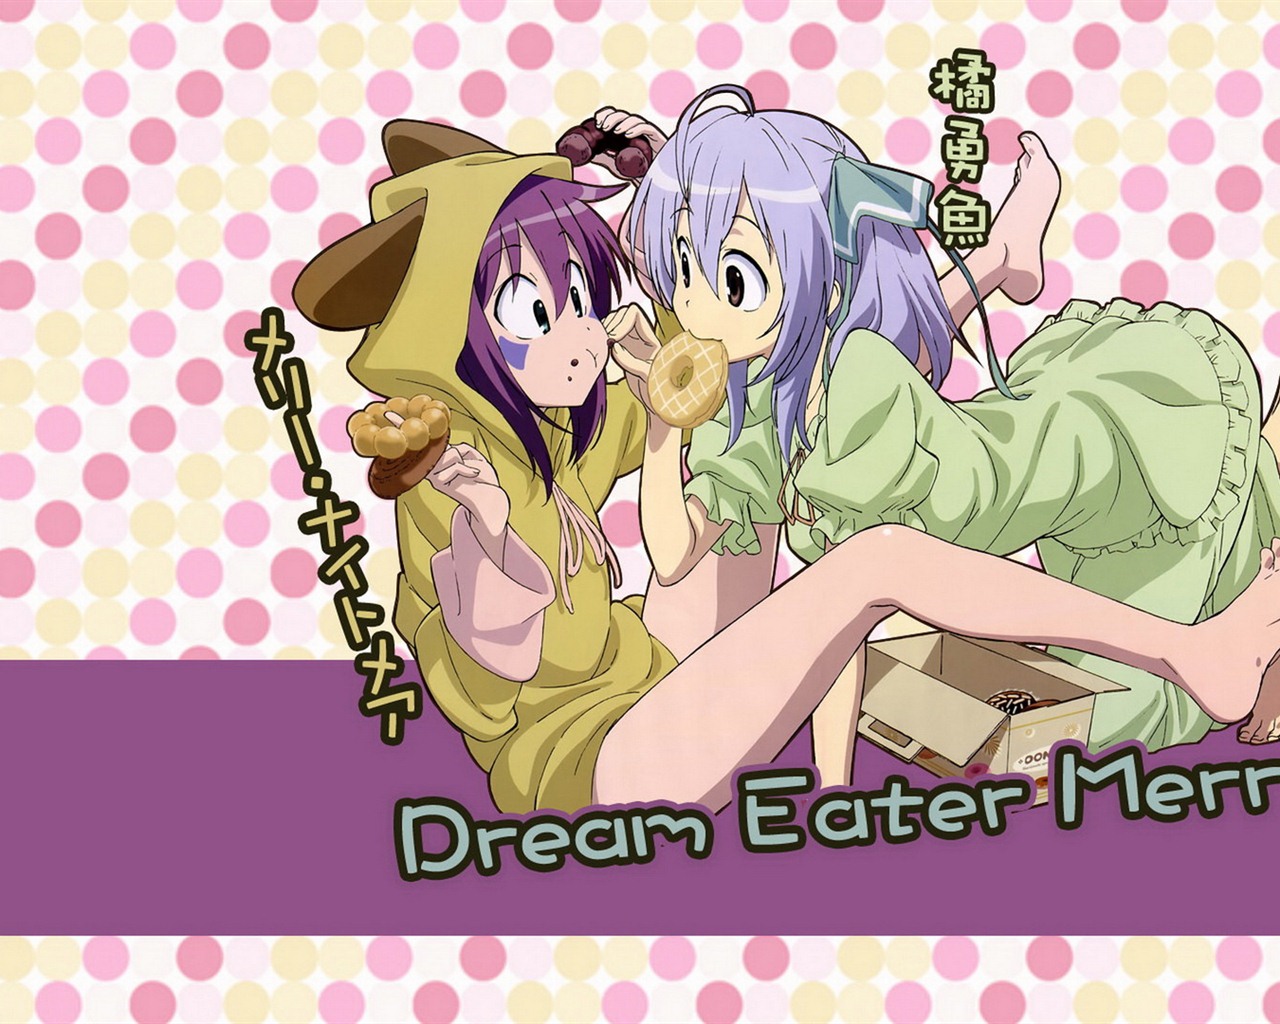 Dream Eater Merry HD wallpapers #25 - 1280x1024